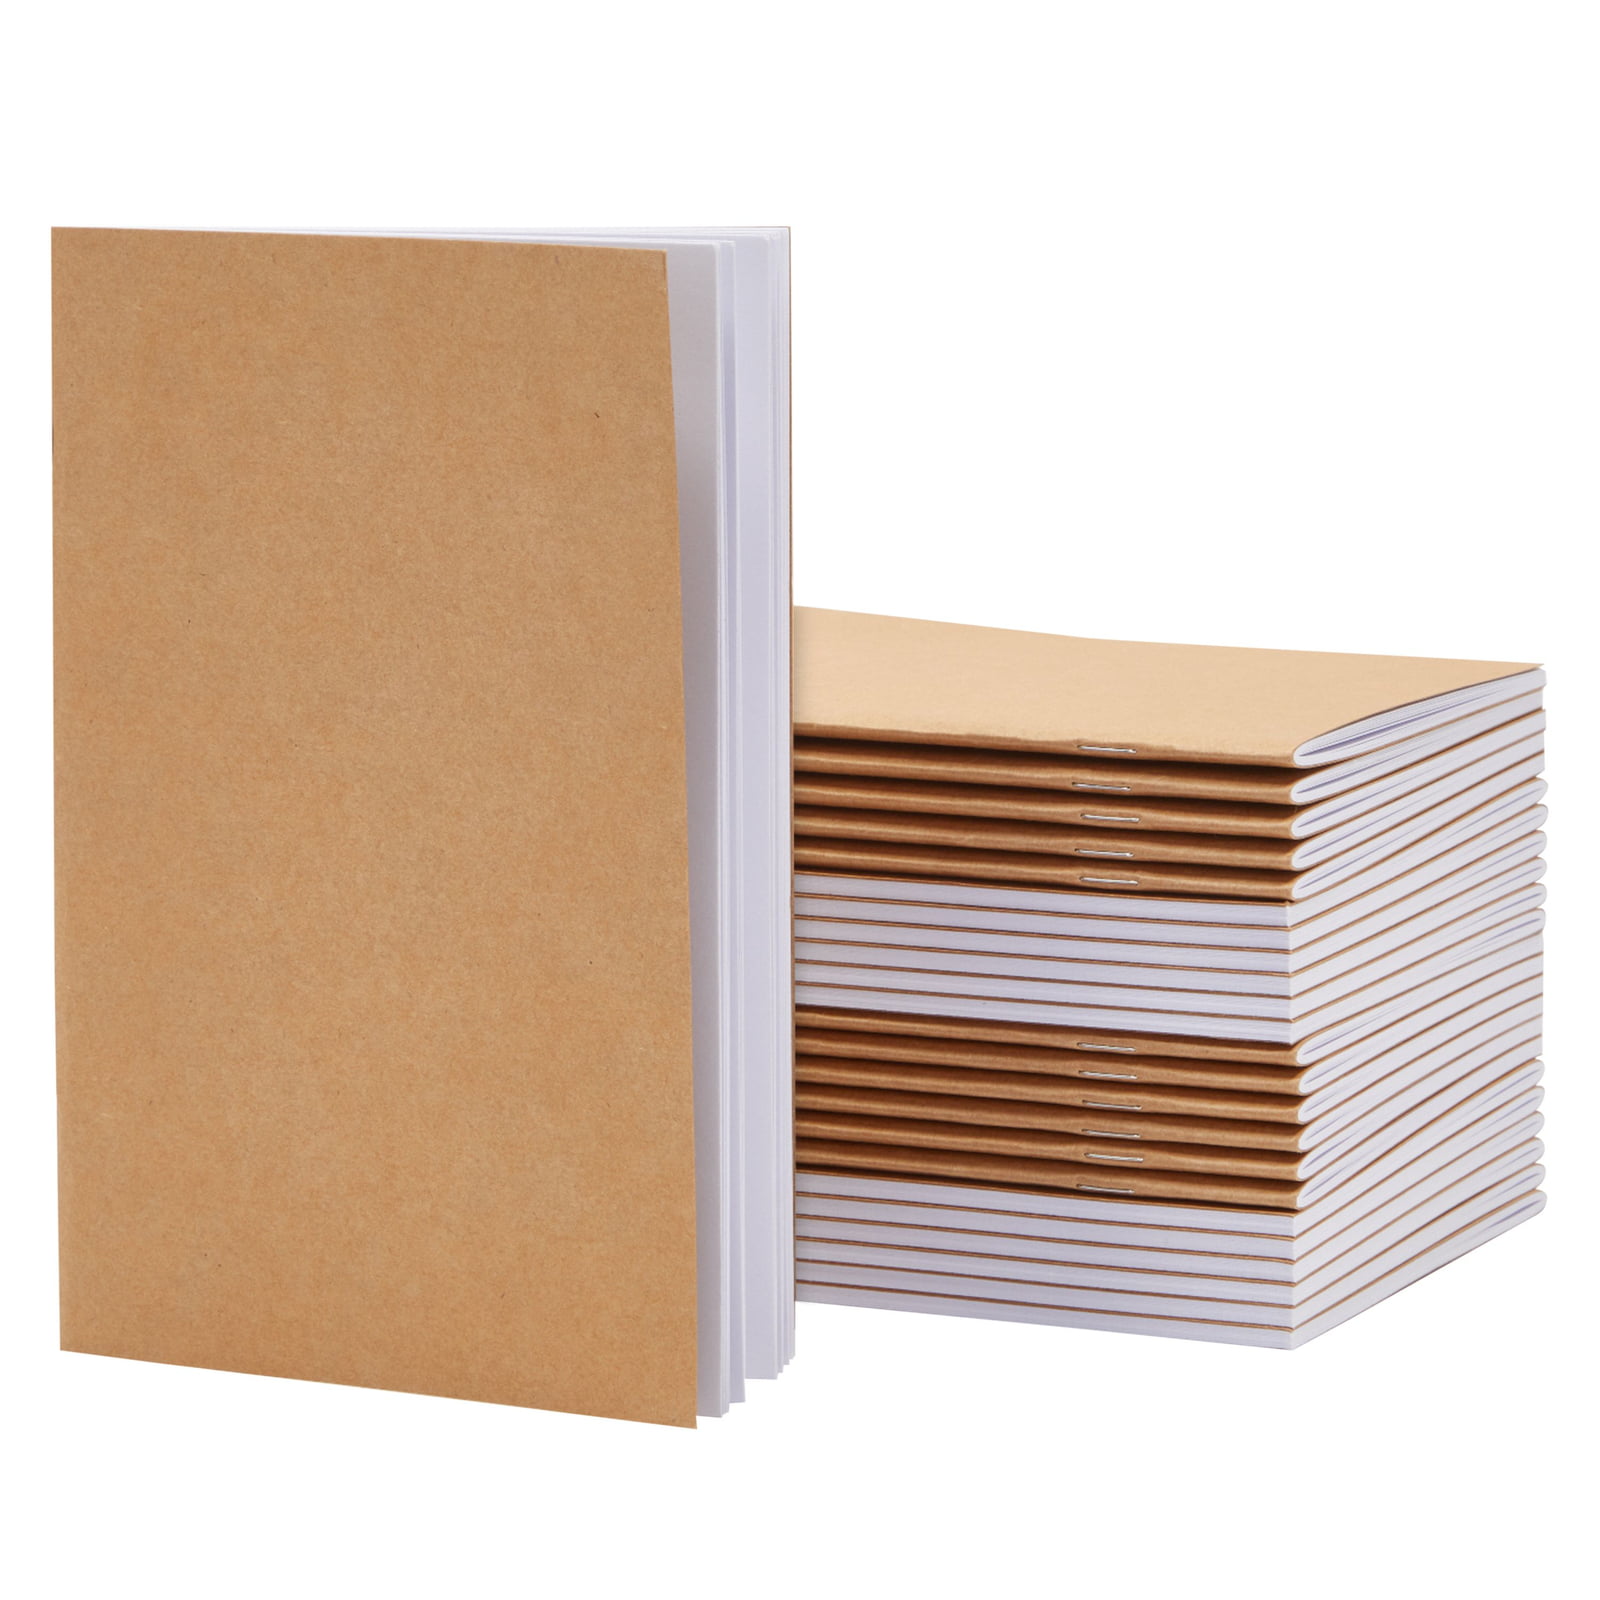 50 PACK Bulk Steno Blank Notebooks Top Wire Bound Notebooks- 5.5 x 8.5 Inches Wholesale notebooks Promo Items- ASSORTED COVER COLORS AVAILABLE Notebooks Bulk Journals Journals Lined Notebooks 